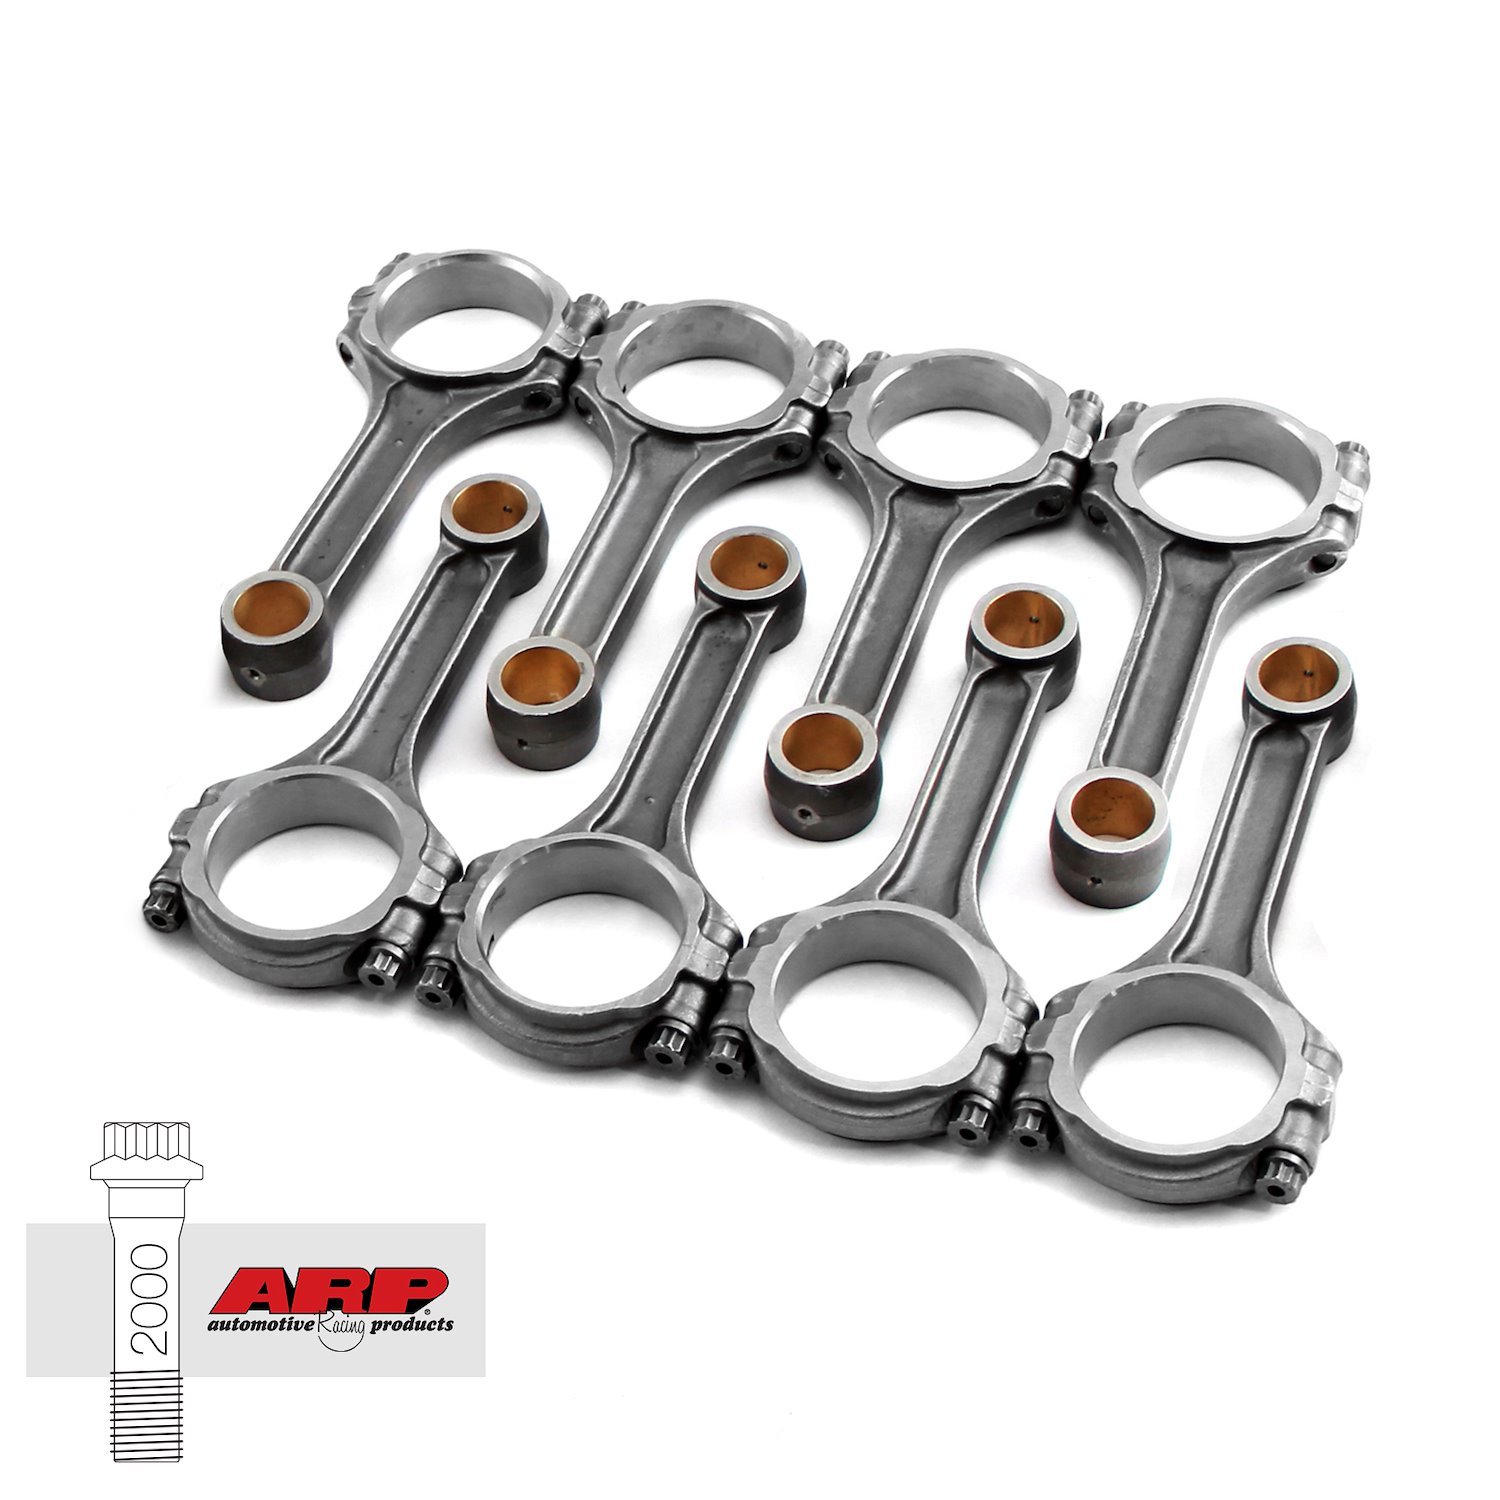 I BEAM 5.400 2.123 .927 5140 CONNECTING RODS